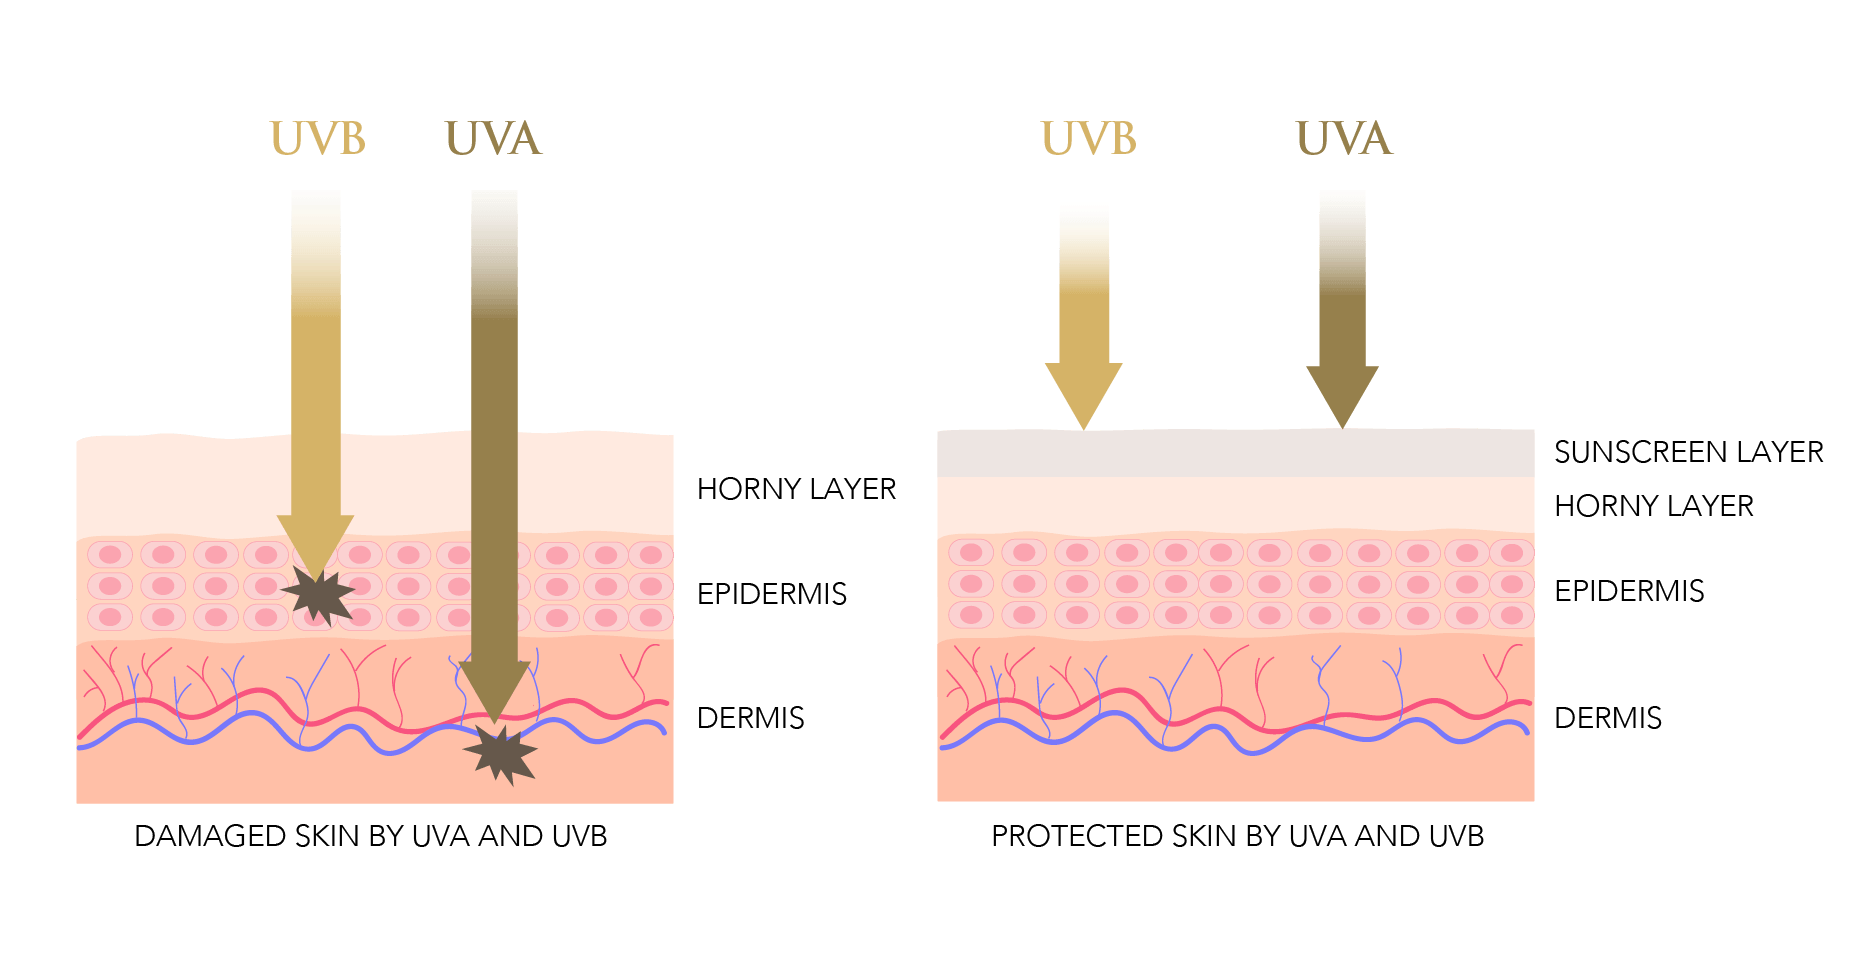 protected vs unprotected skin by sunscreen